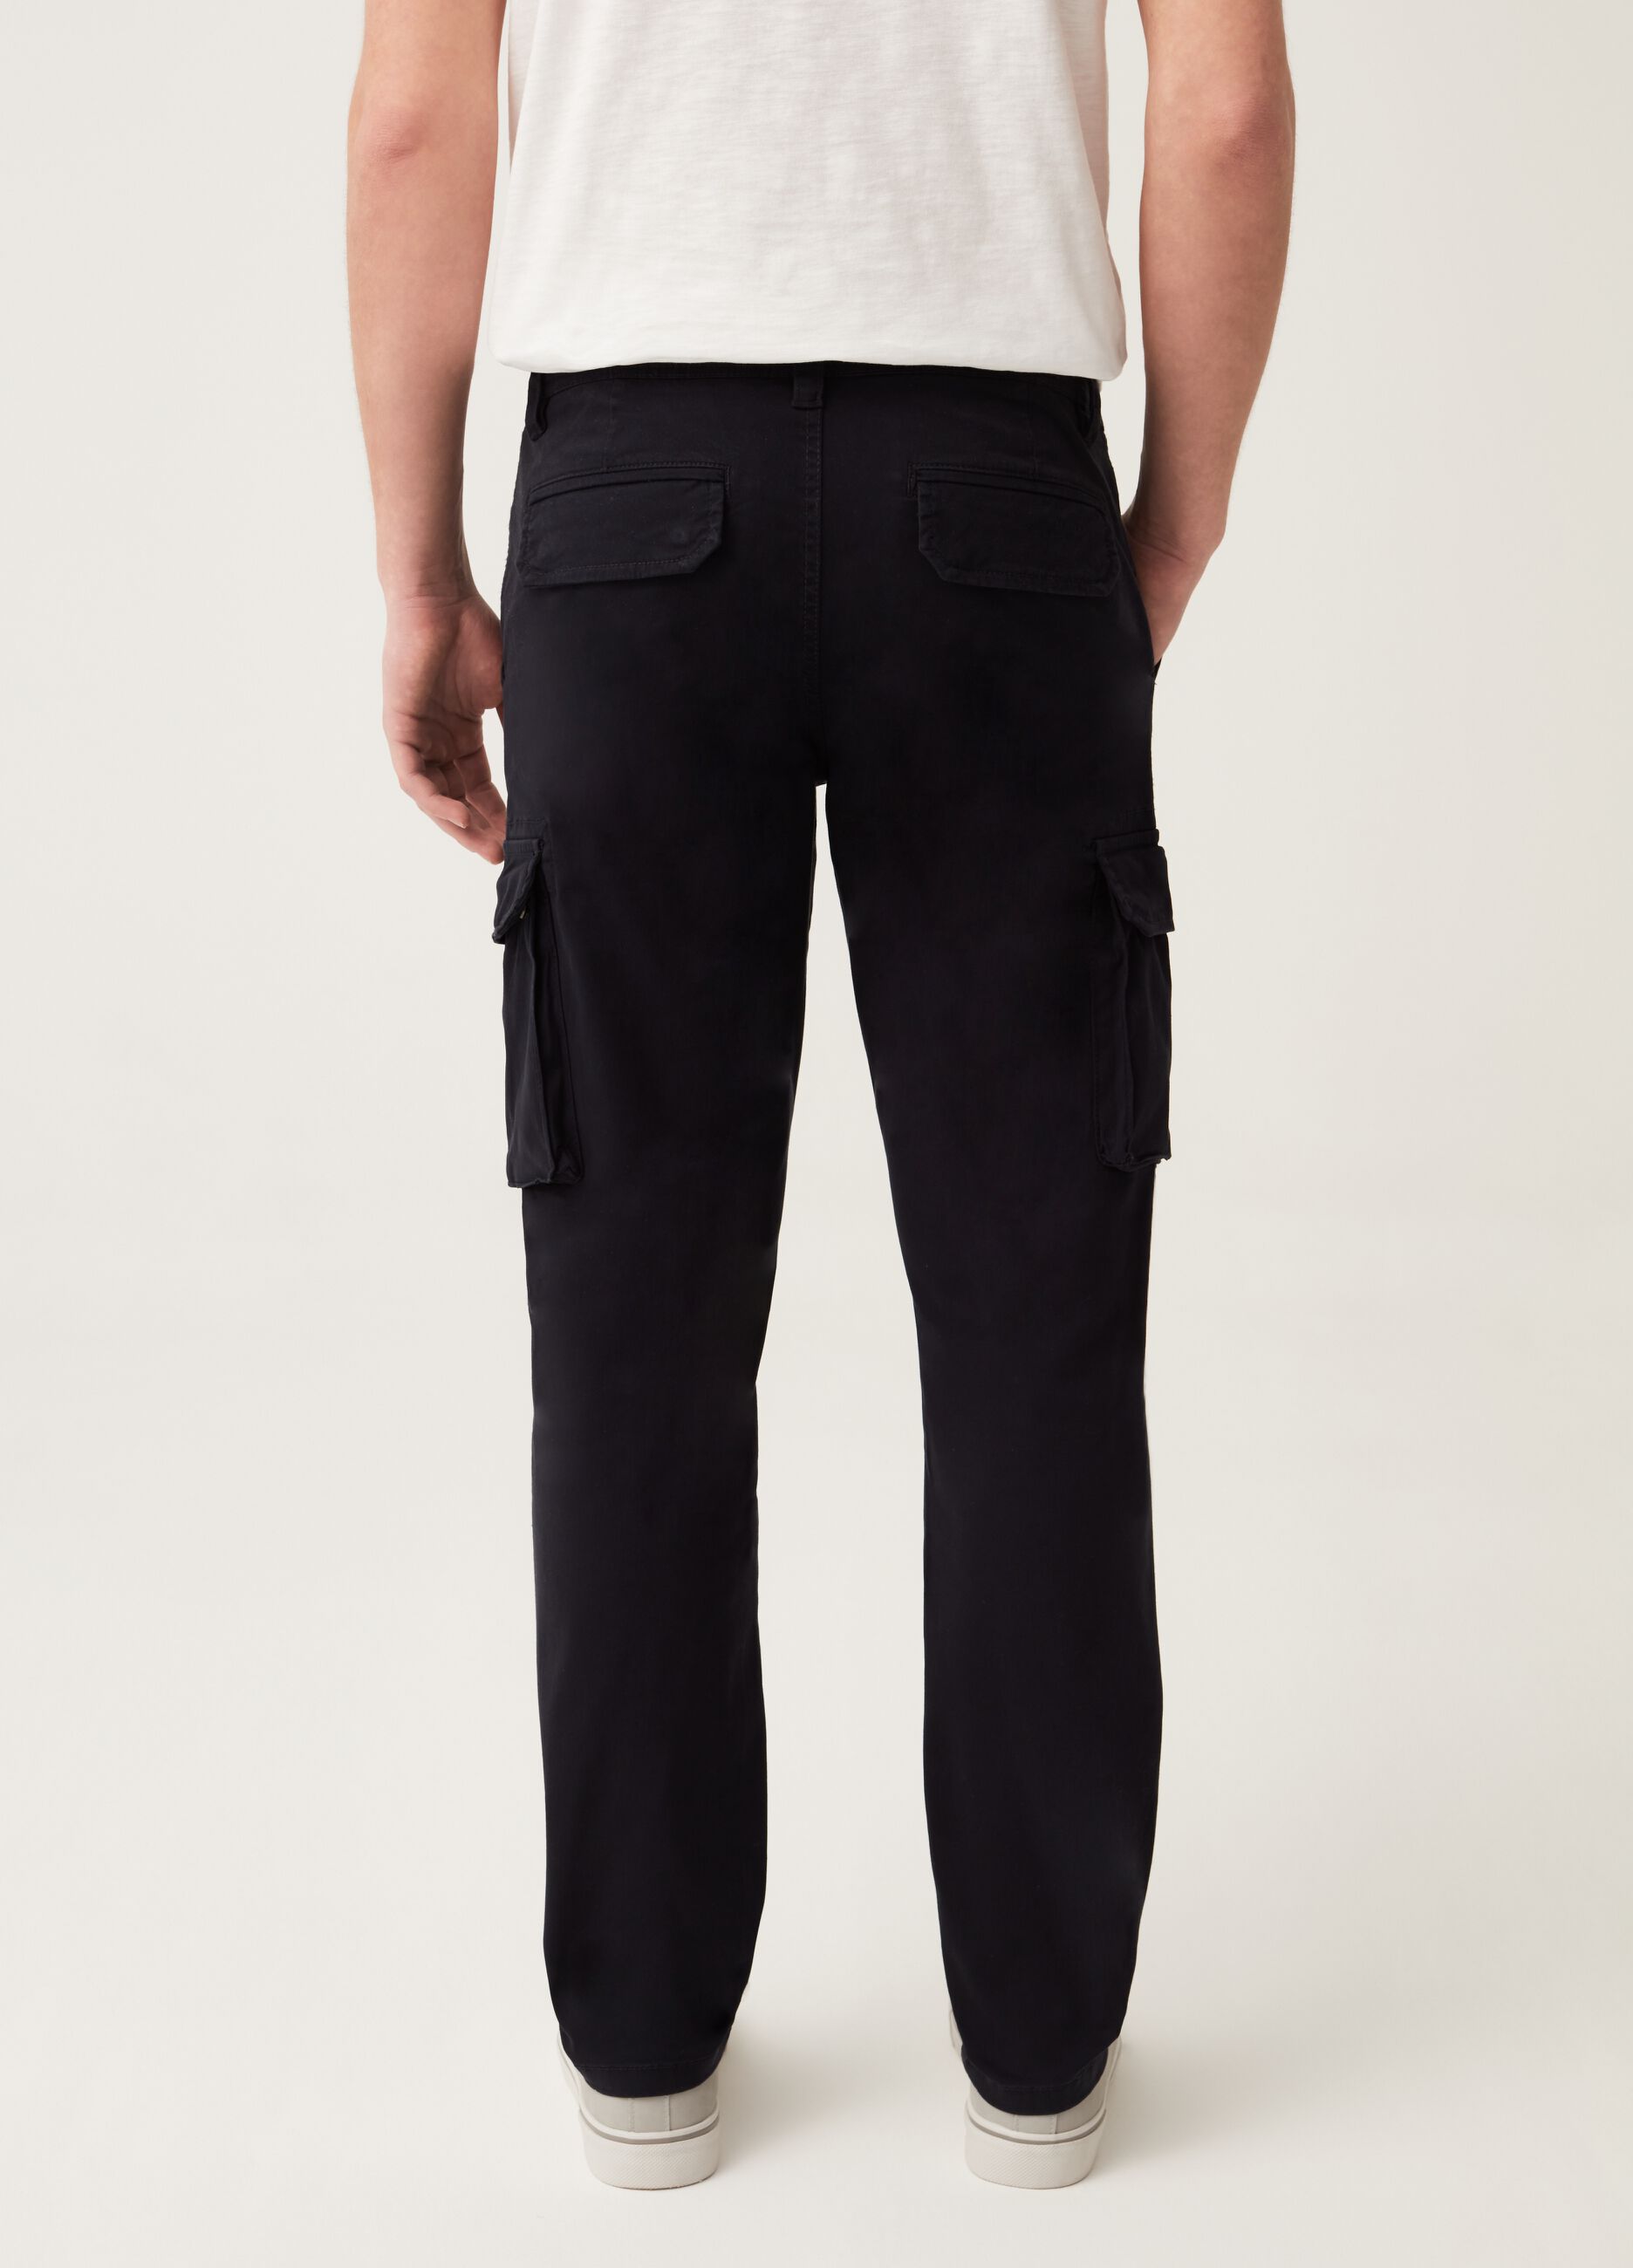 Yarn dyed stretch cotton cargo pants